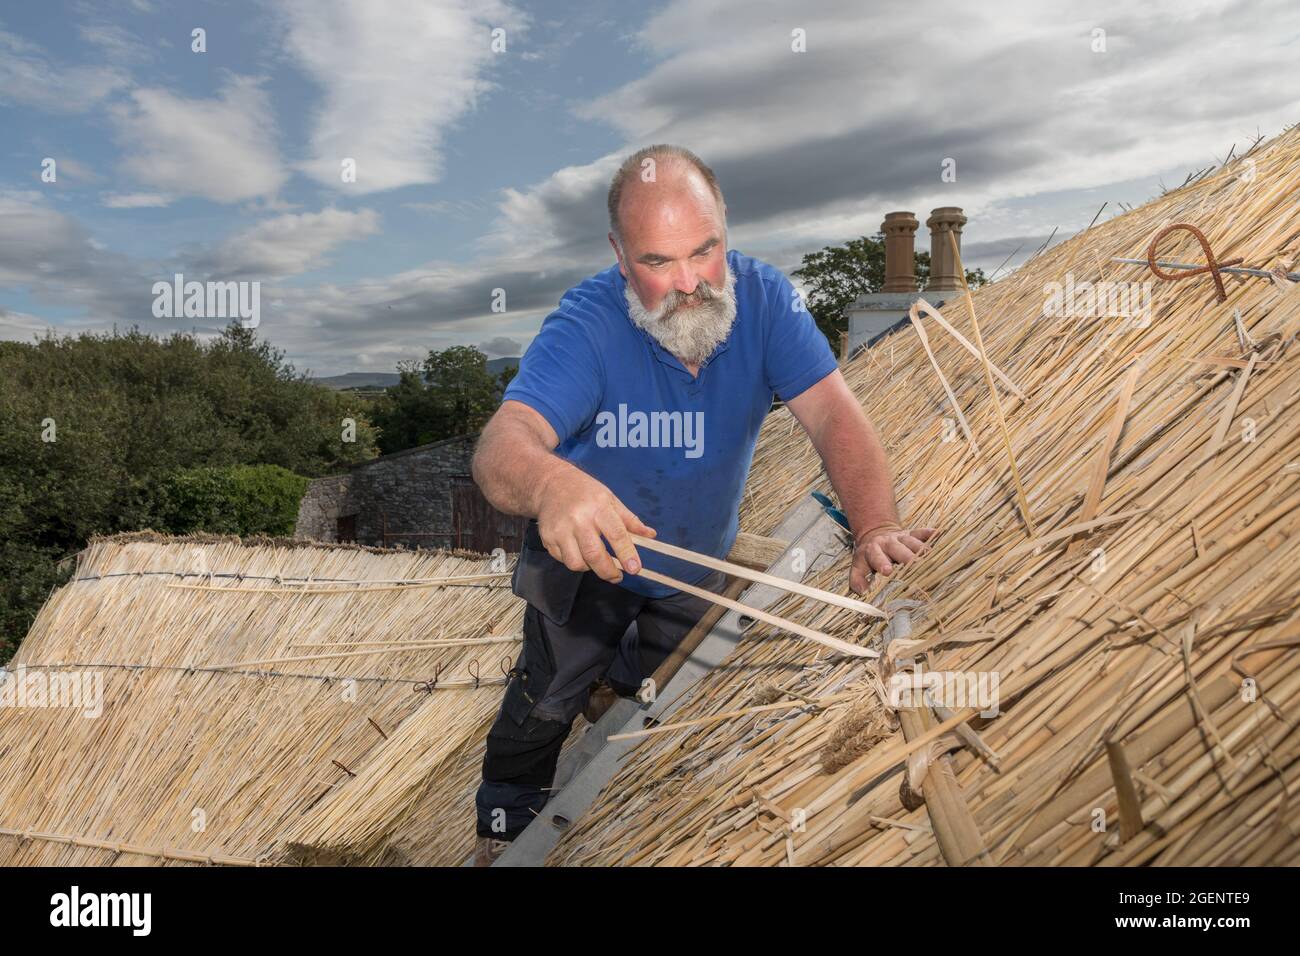 Fenit, Kerry, Ireland. 19th August, 2021. Master thatcher, Richard Ó Loideoin  working at the traditional craft of thatching on a roof at Chapeltown n Stock Photo